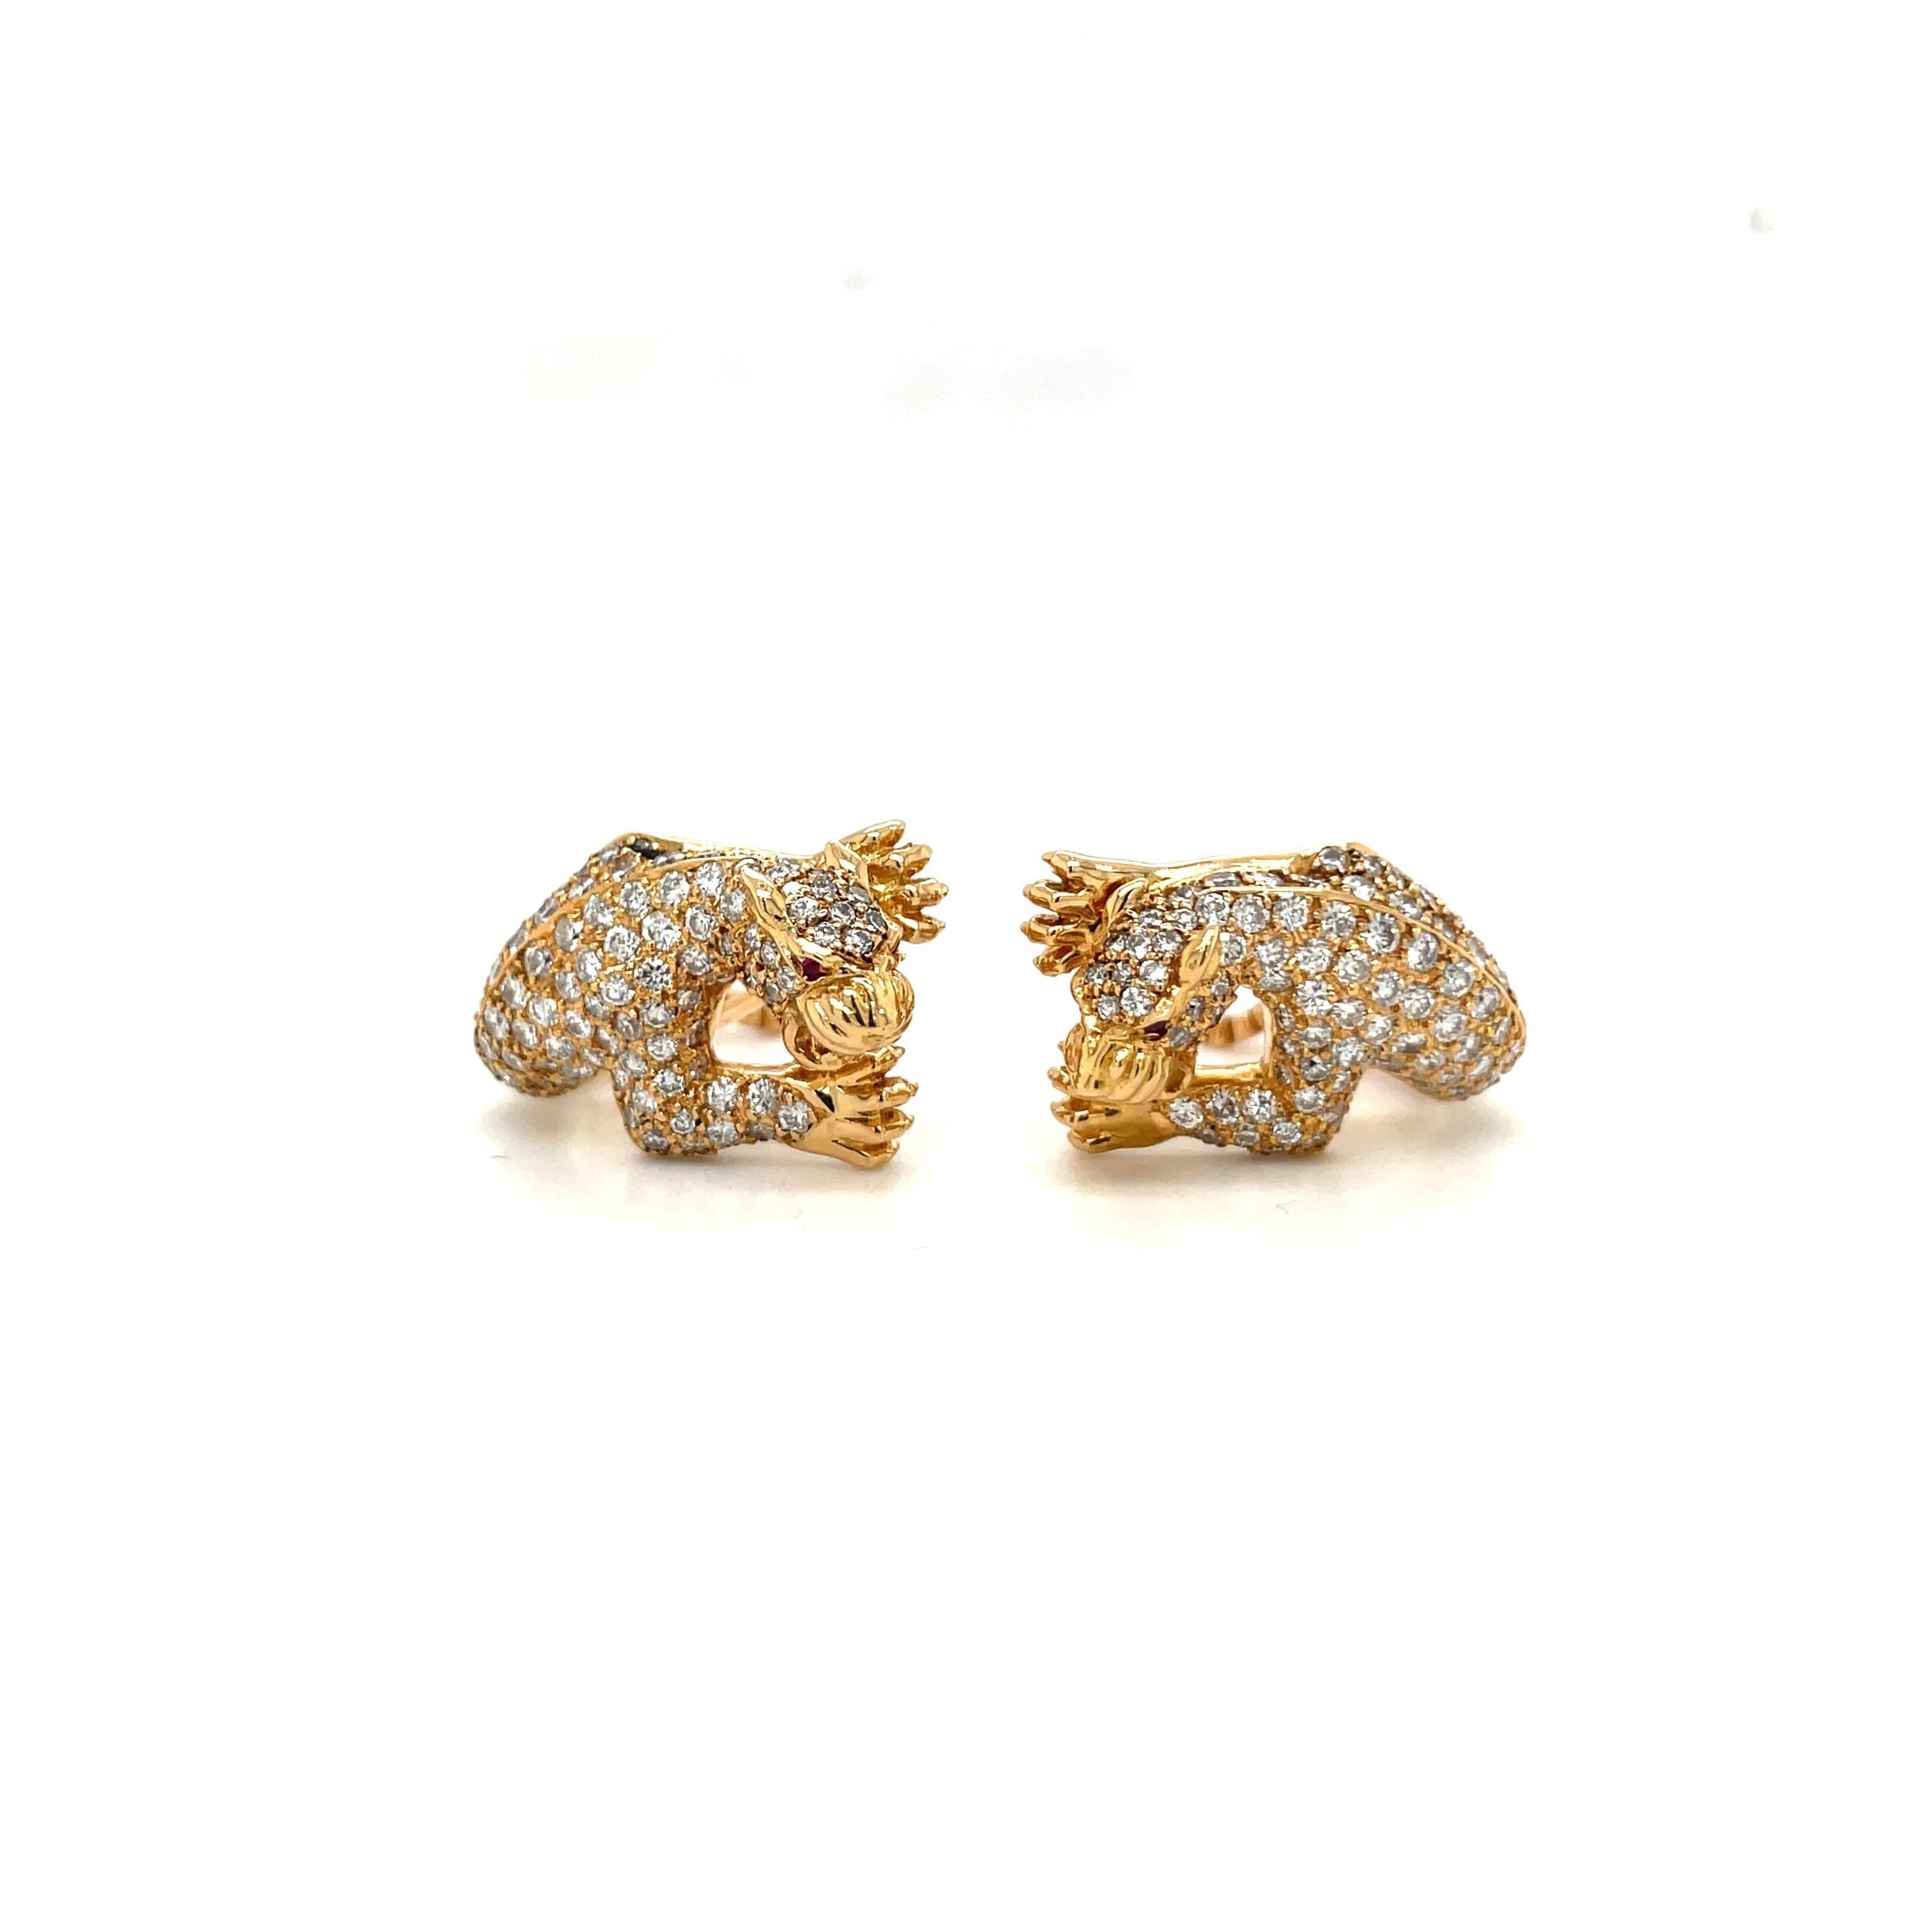 Carrera Y Carrera has built its its famous name on figurative designs, an obsession with surface finishes, and a compelling way of seeing beauty in art and nature.
These 18 karat yellow gold earrings are the perfect example of Carrera's iconic